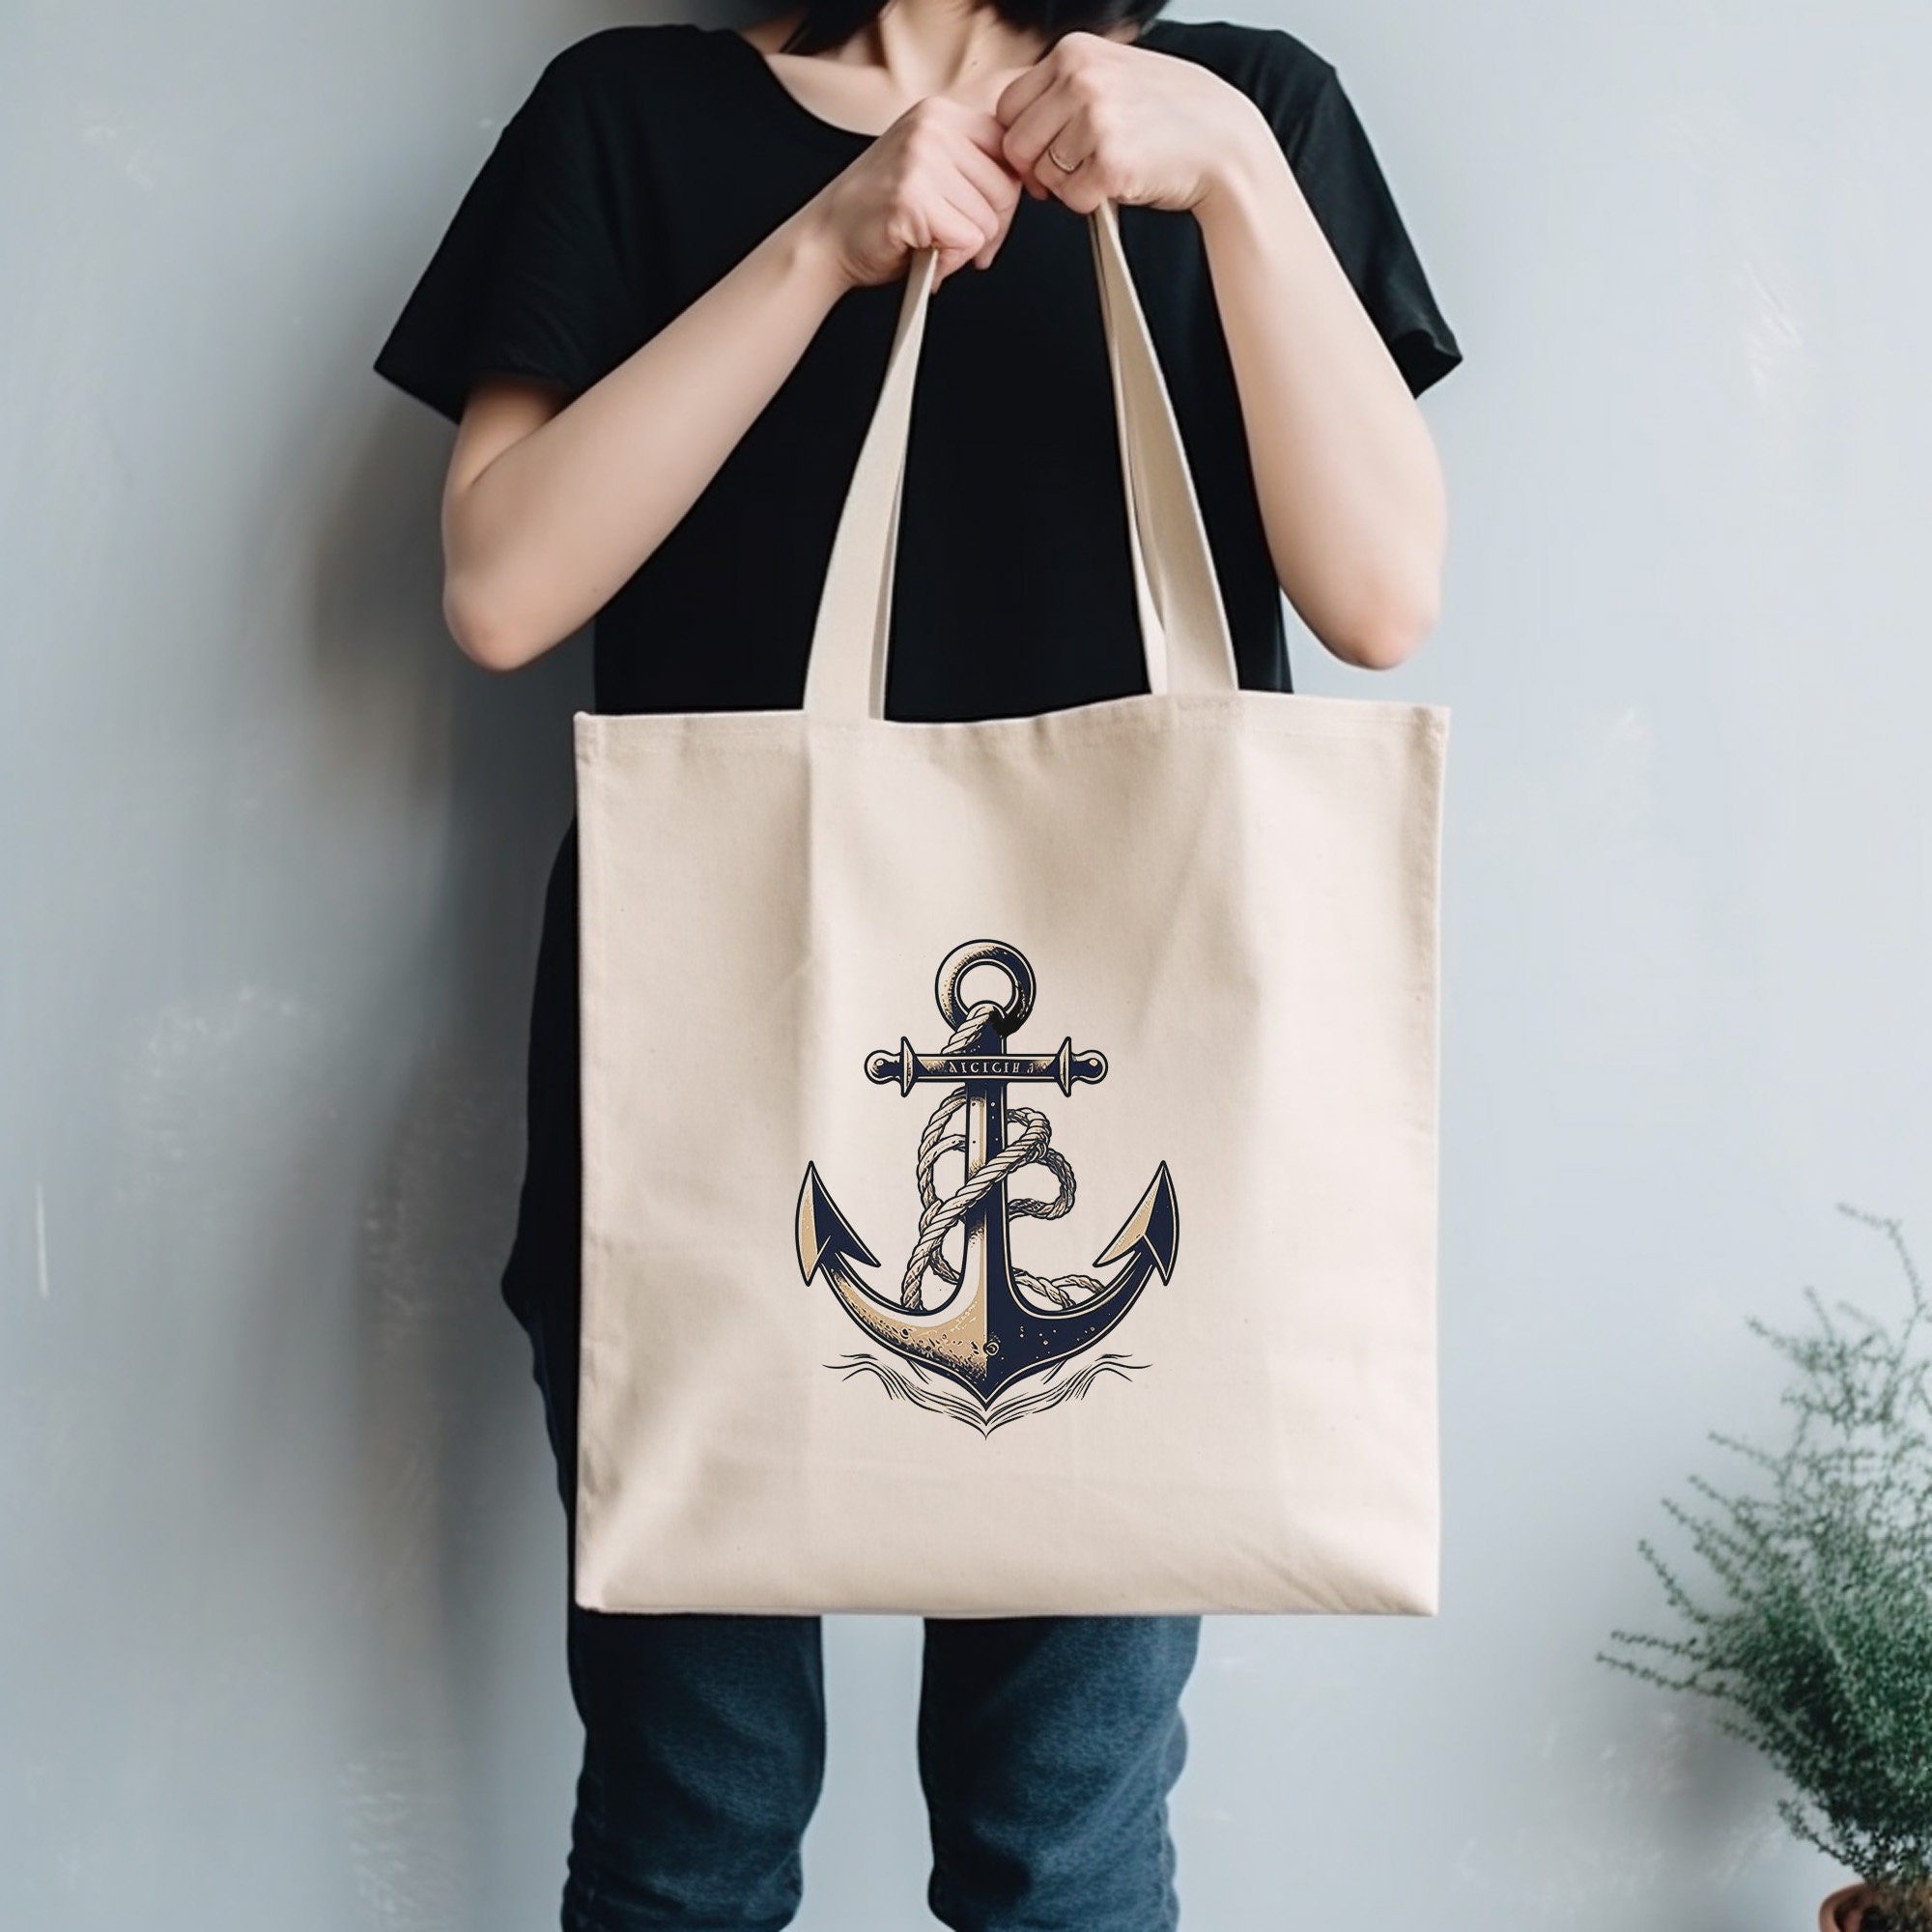 Buy Anchor Tote Bag Online In India - Etsy India